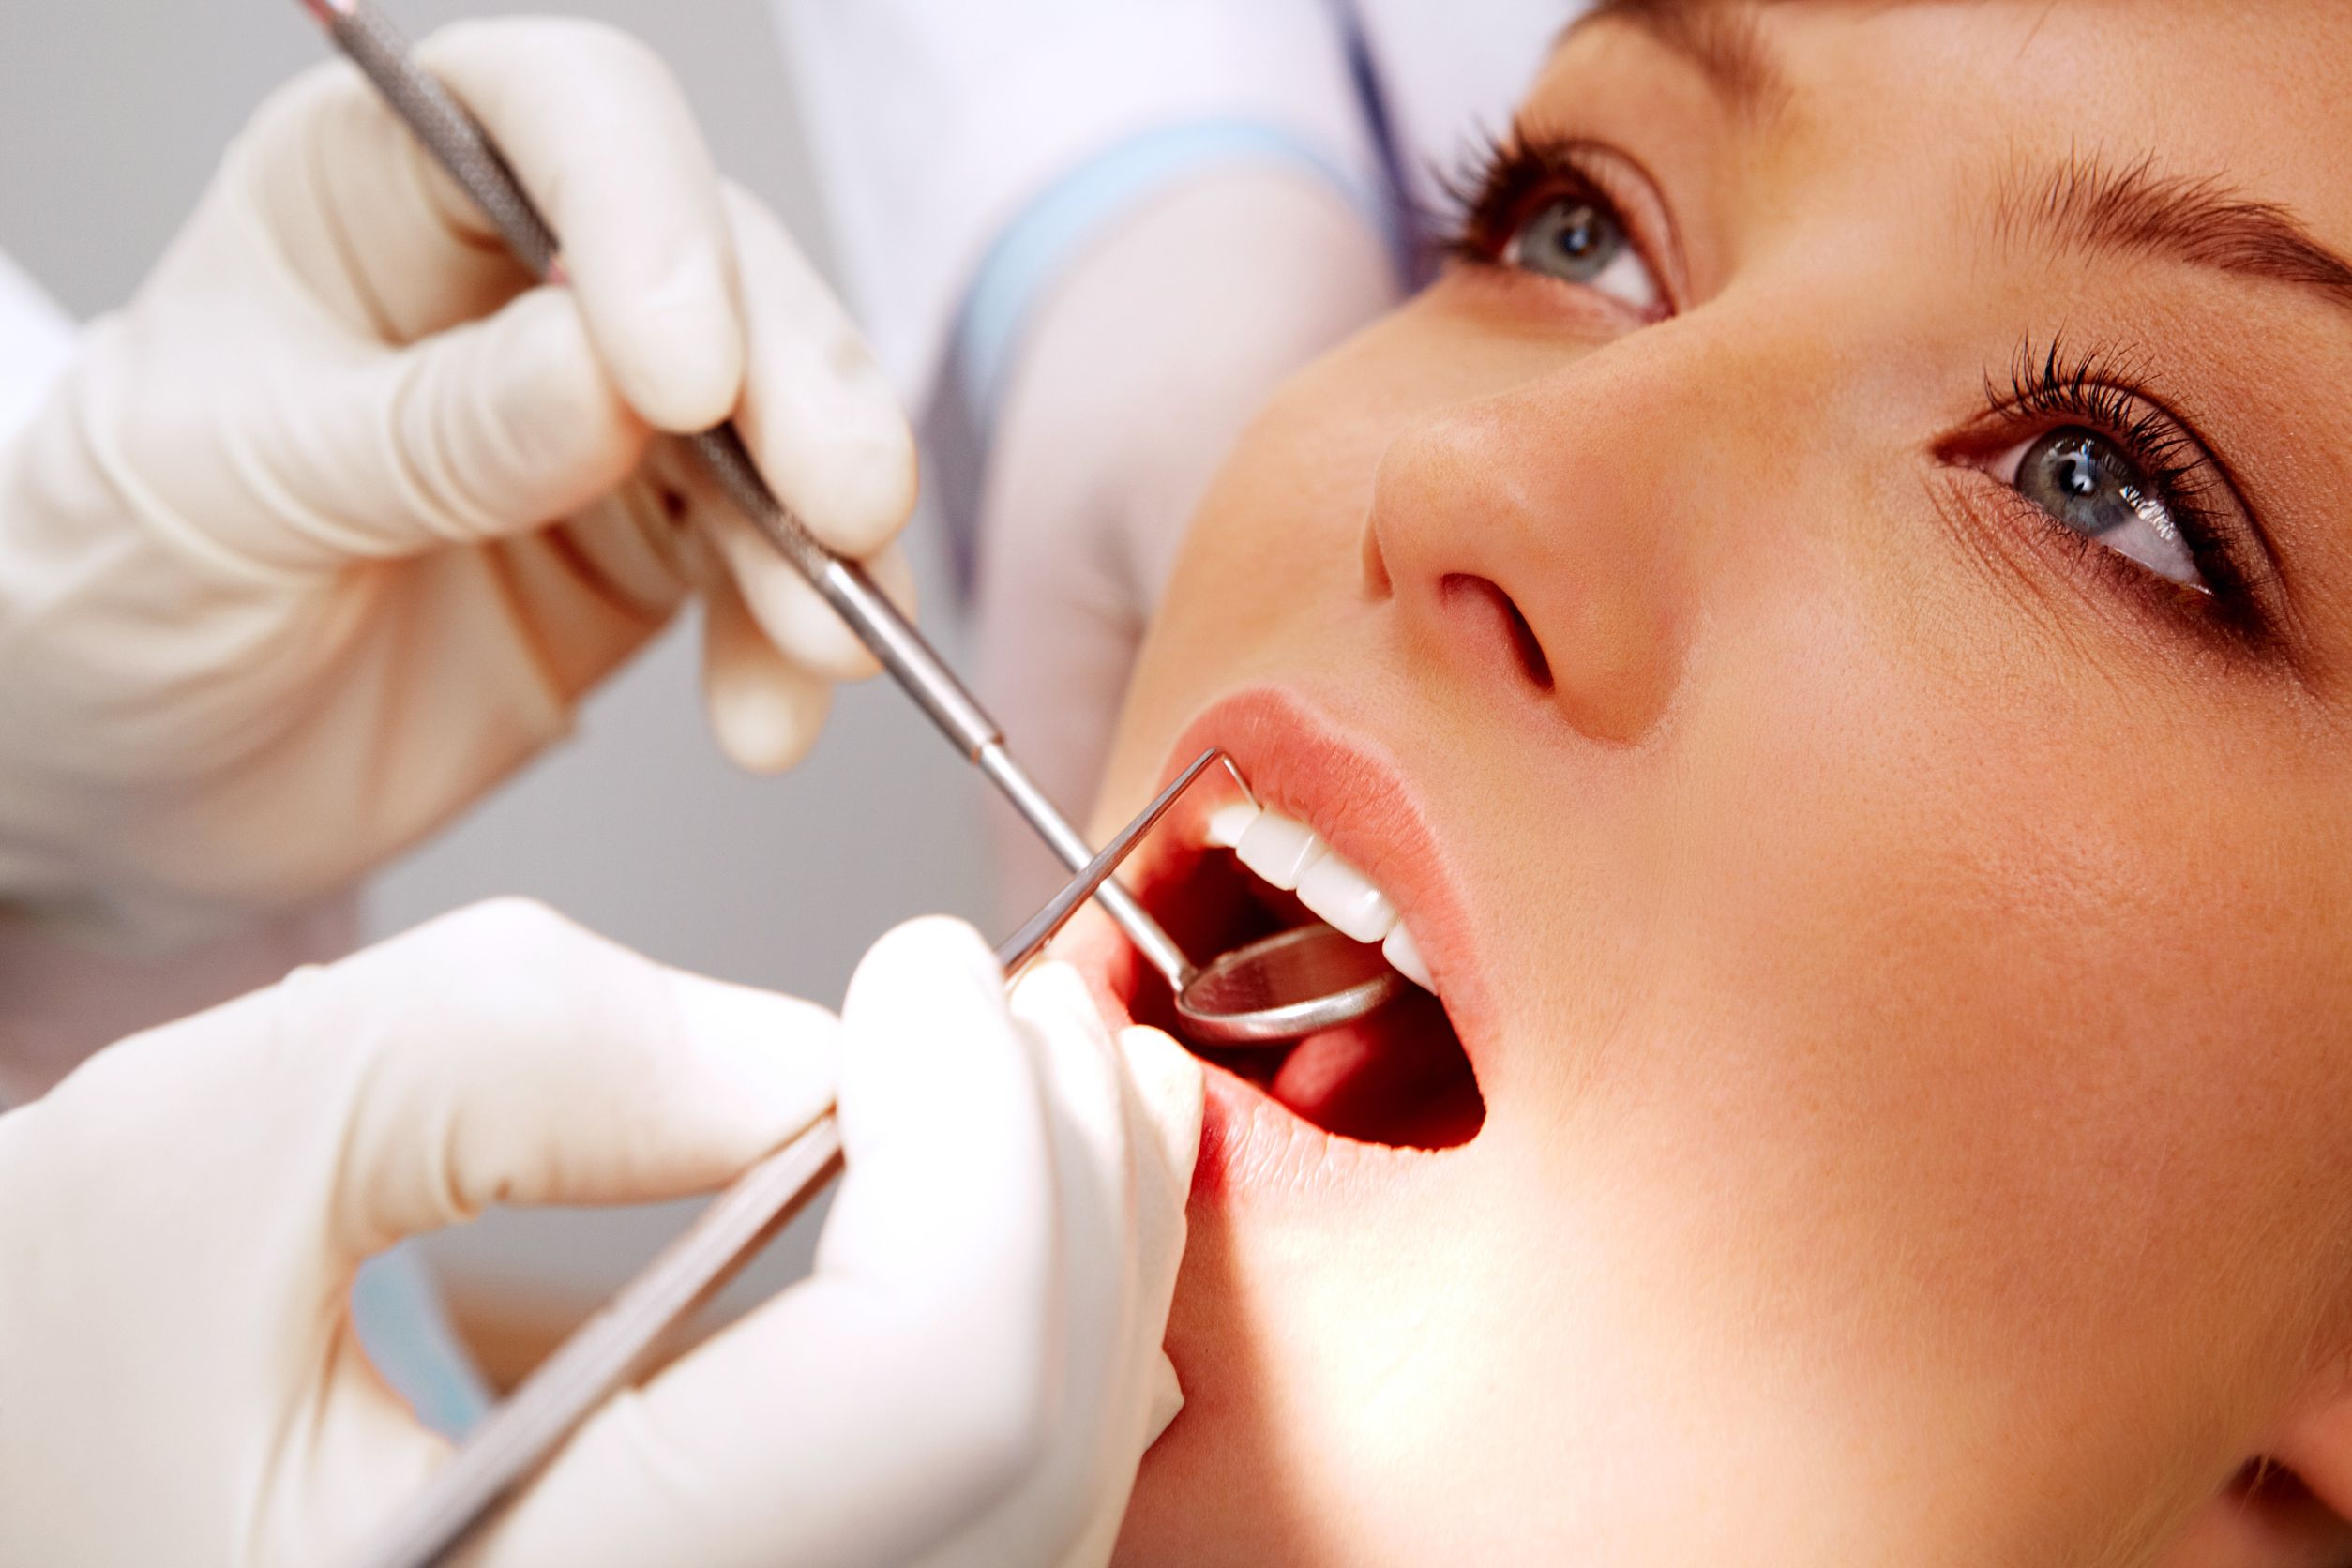 Professional Teeth Cleaning in Midwest City, OK Helps Rejuvenate a Patient’s Smile